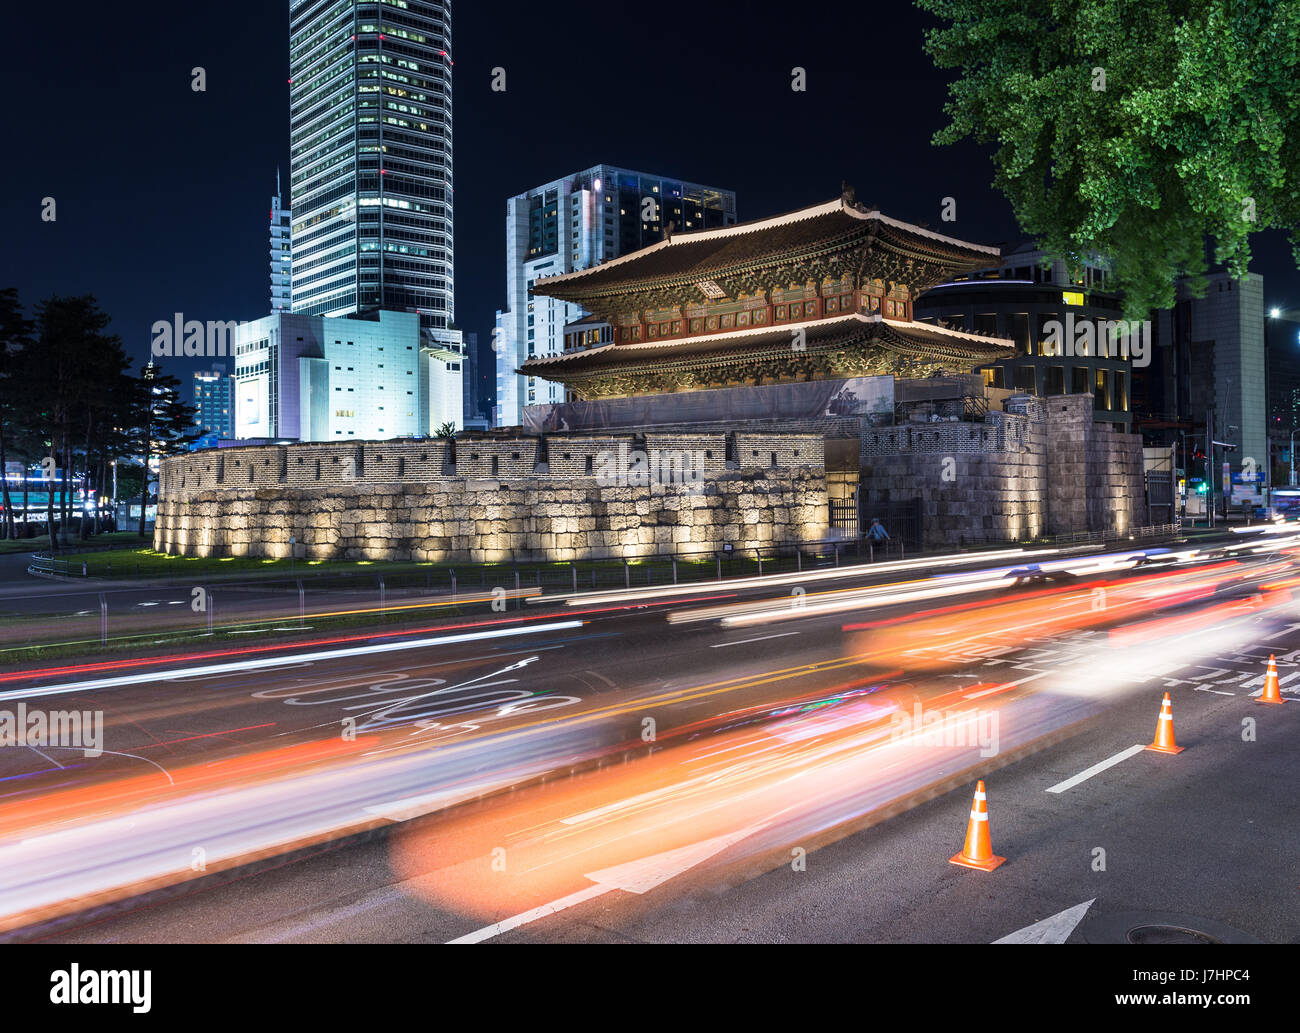 Traffic, captured with blurred motion, rushes around the Dongdaemun gate at night in Seoul, South Korea capital city. The gate was part of the Seoul c Stock Photo